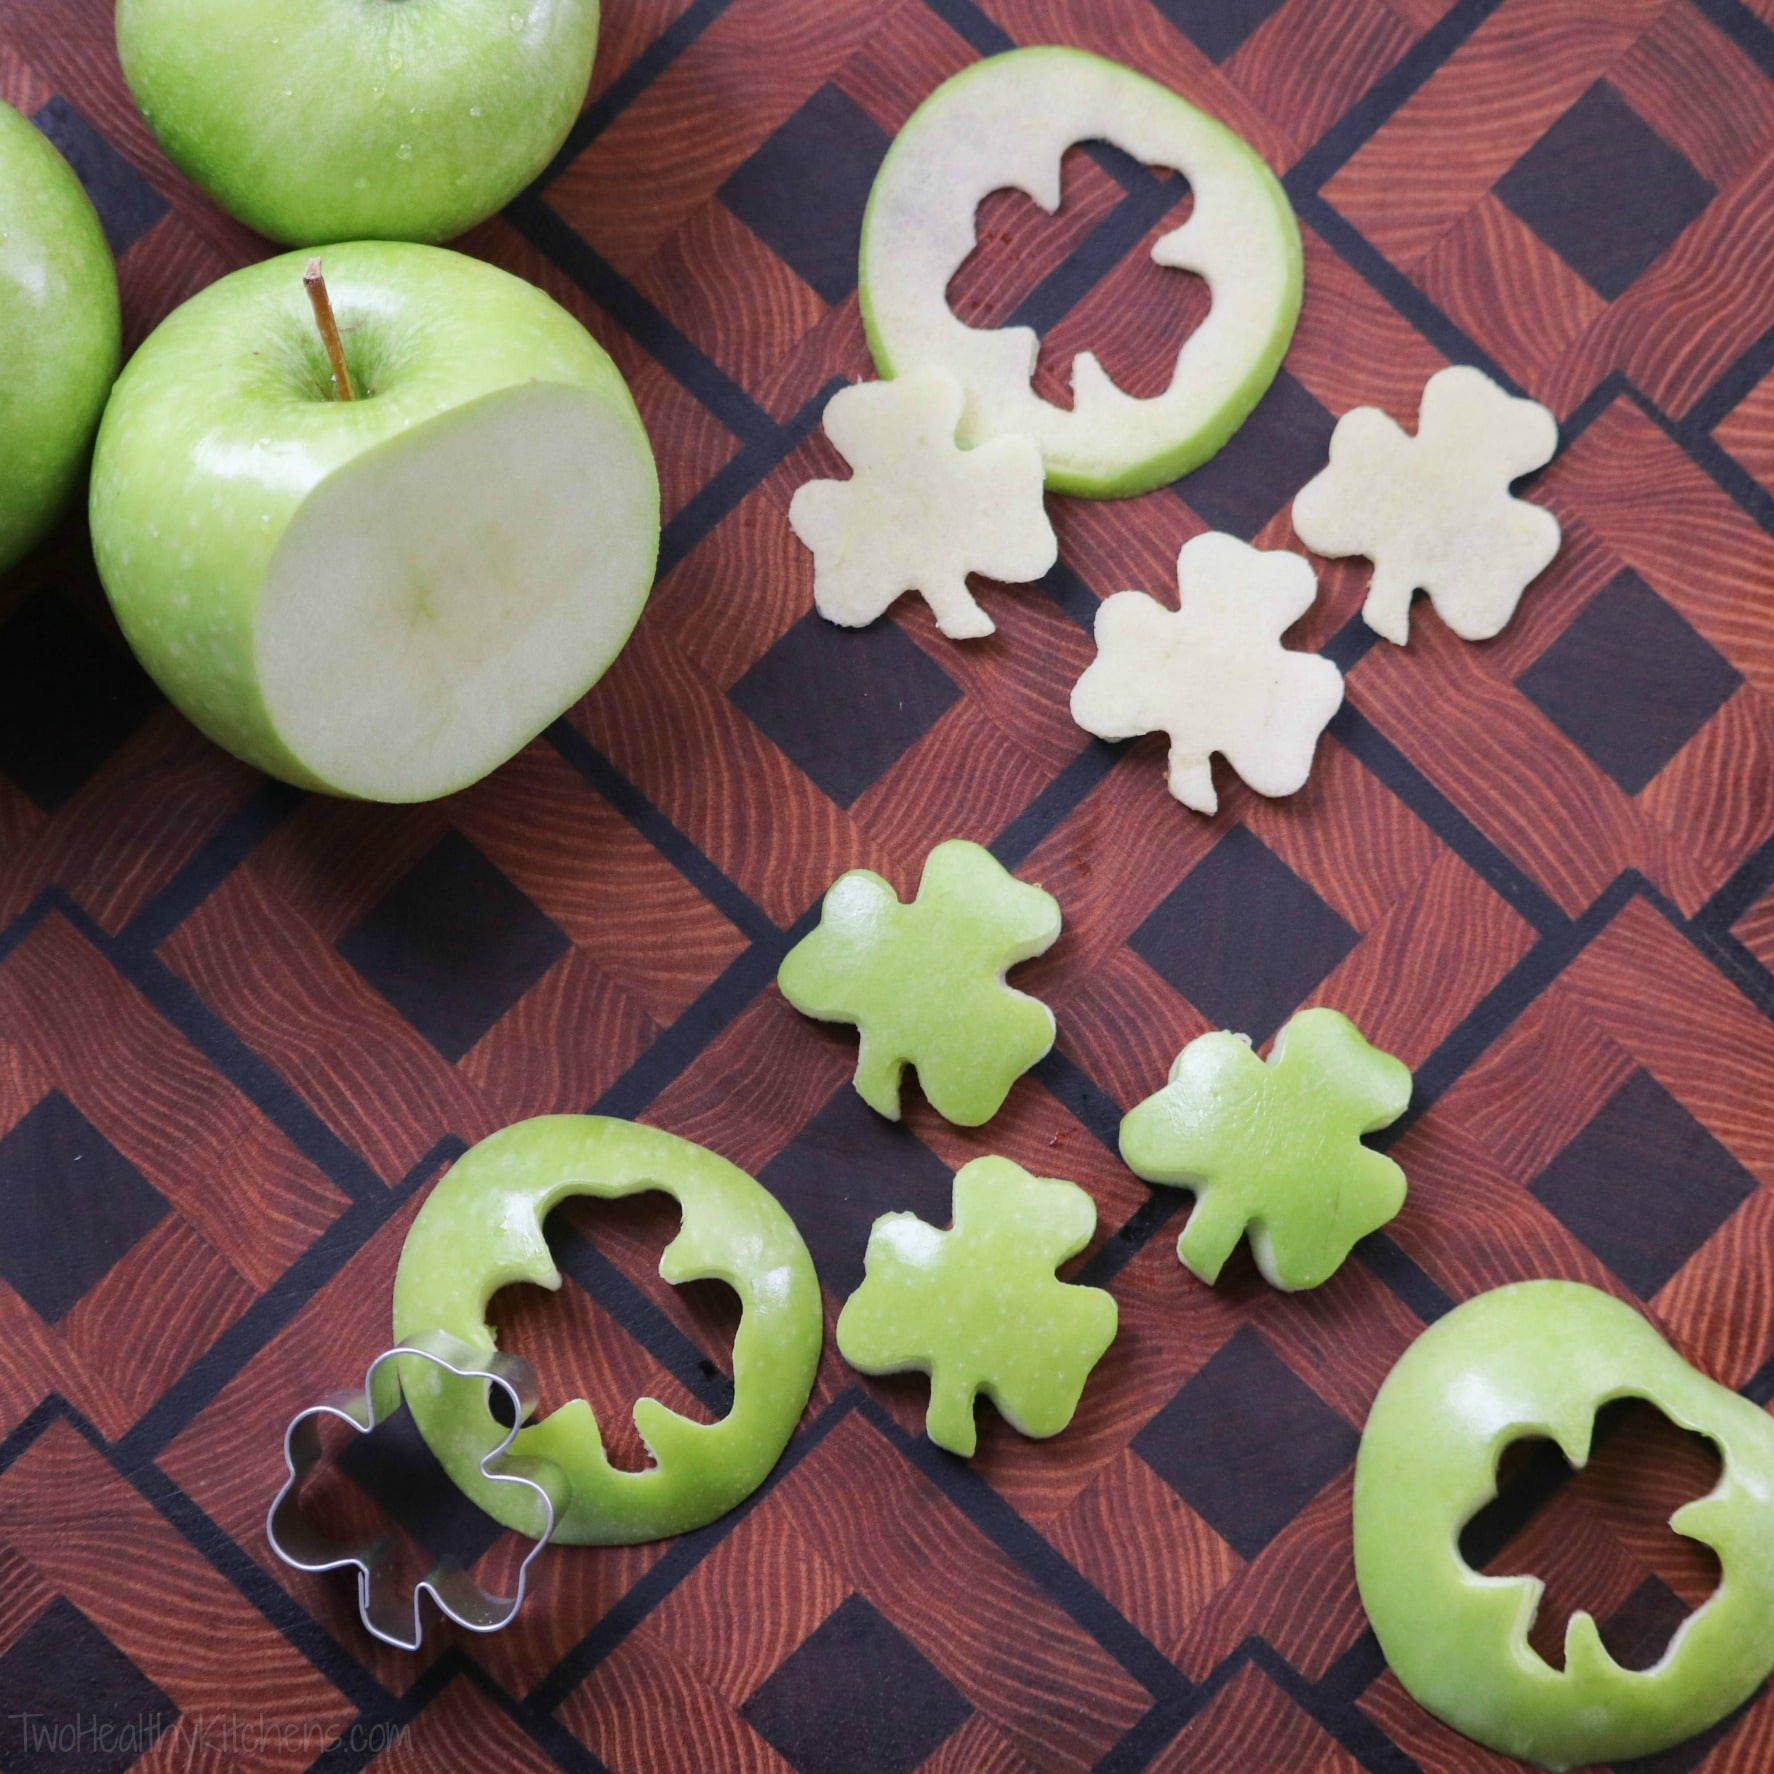 This Naturally Sweetened Pot o' Gold Applesauce is such a fun St. Patrick’s Day snack! Quick, easy – and so healthy, too! With natural sweetness from a surprising (golden!) mix-in, your kids will love the luck-o-the-Irish twist, and you’ll love all the great nutrition! | www.TwoHealthyKitchens.com